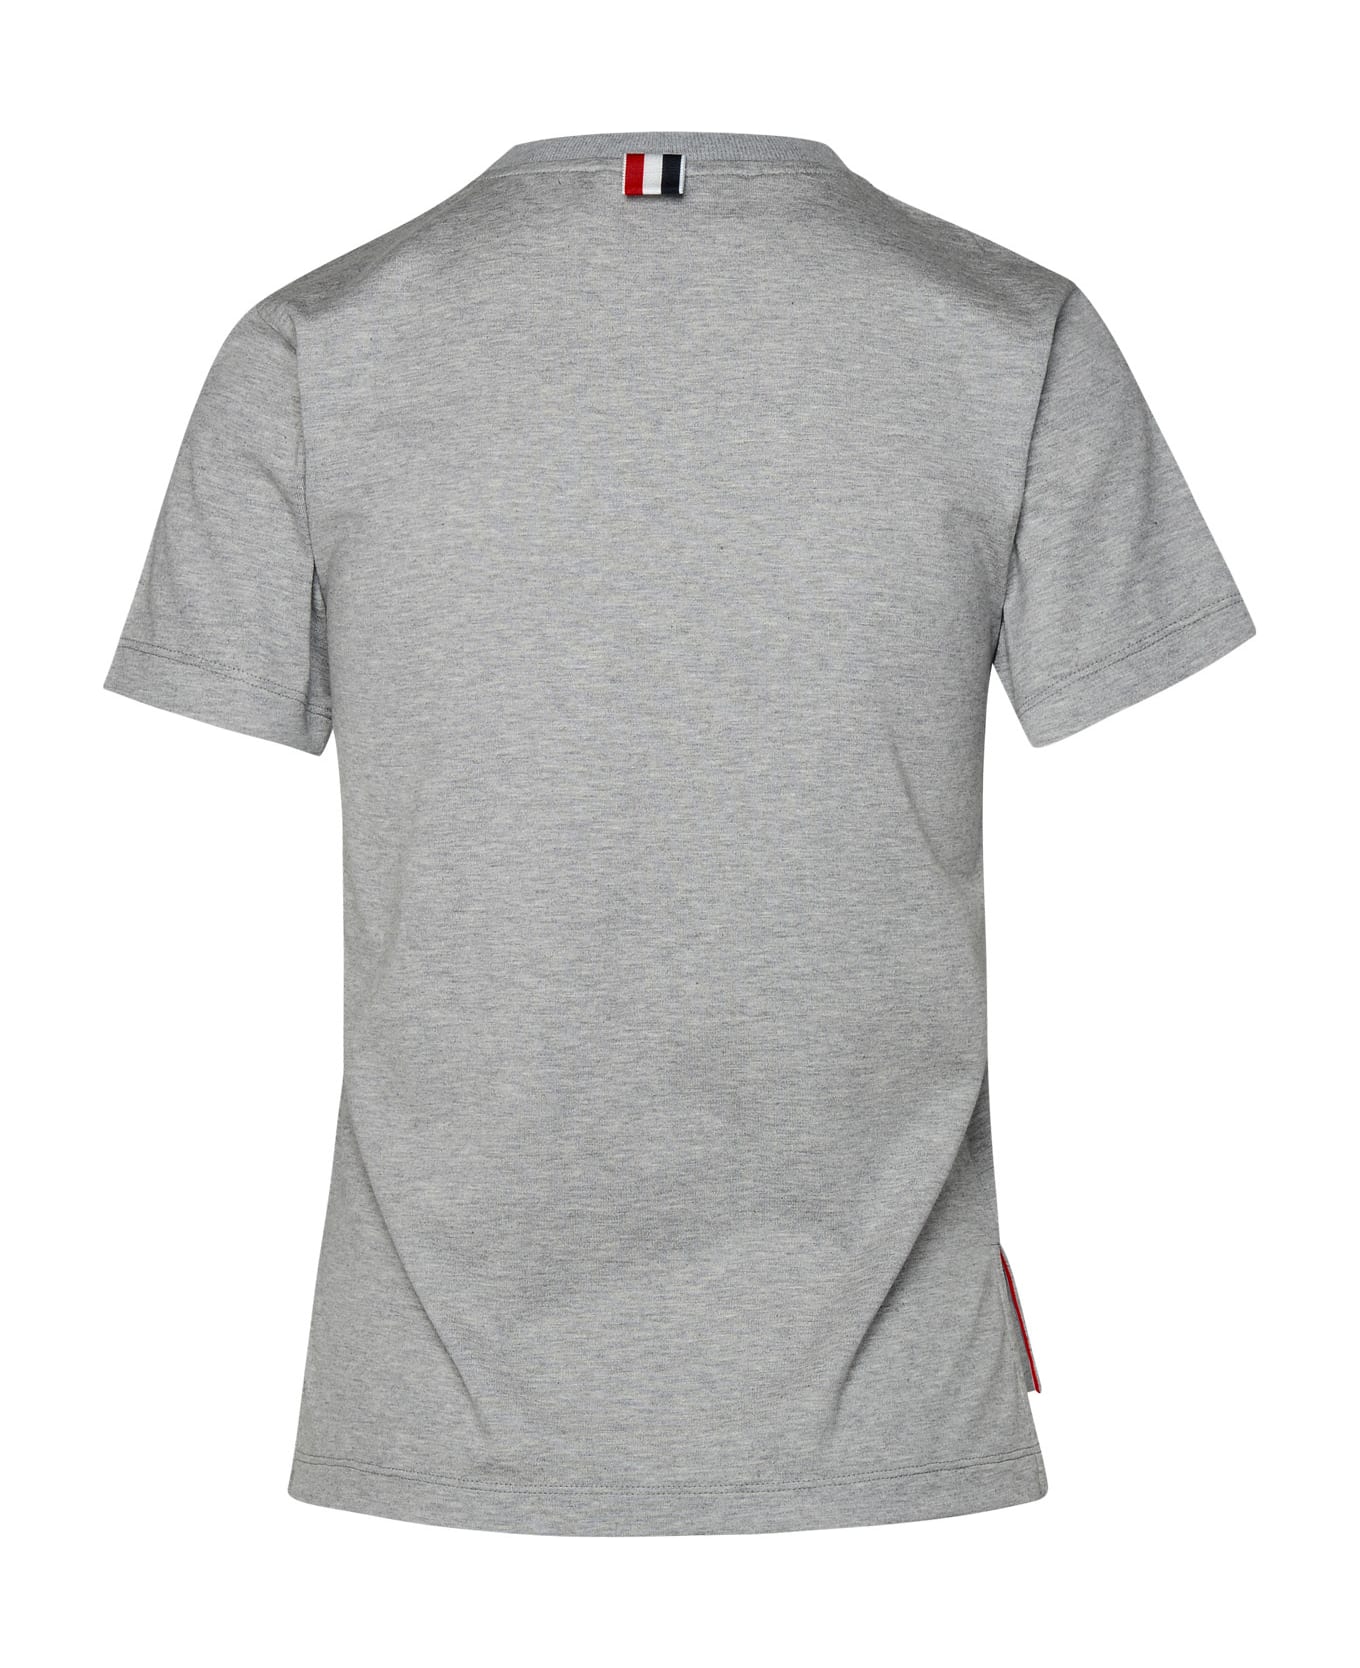 Thom Browne 'relaxed' Grey Cotton T-shirt - LIGHT GREY